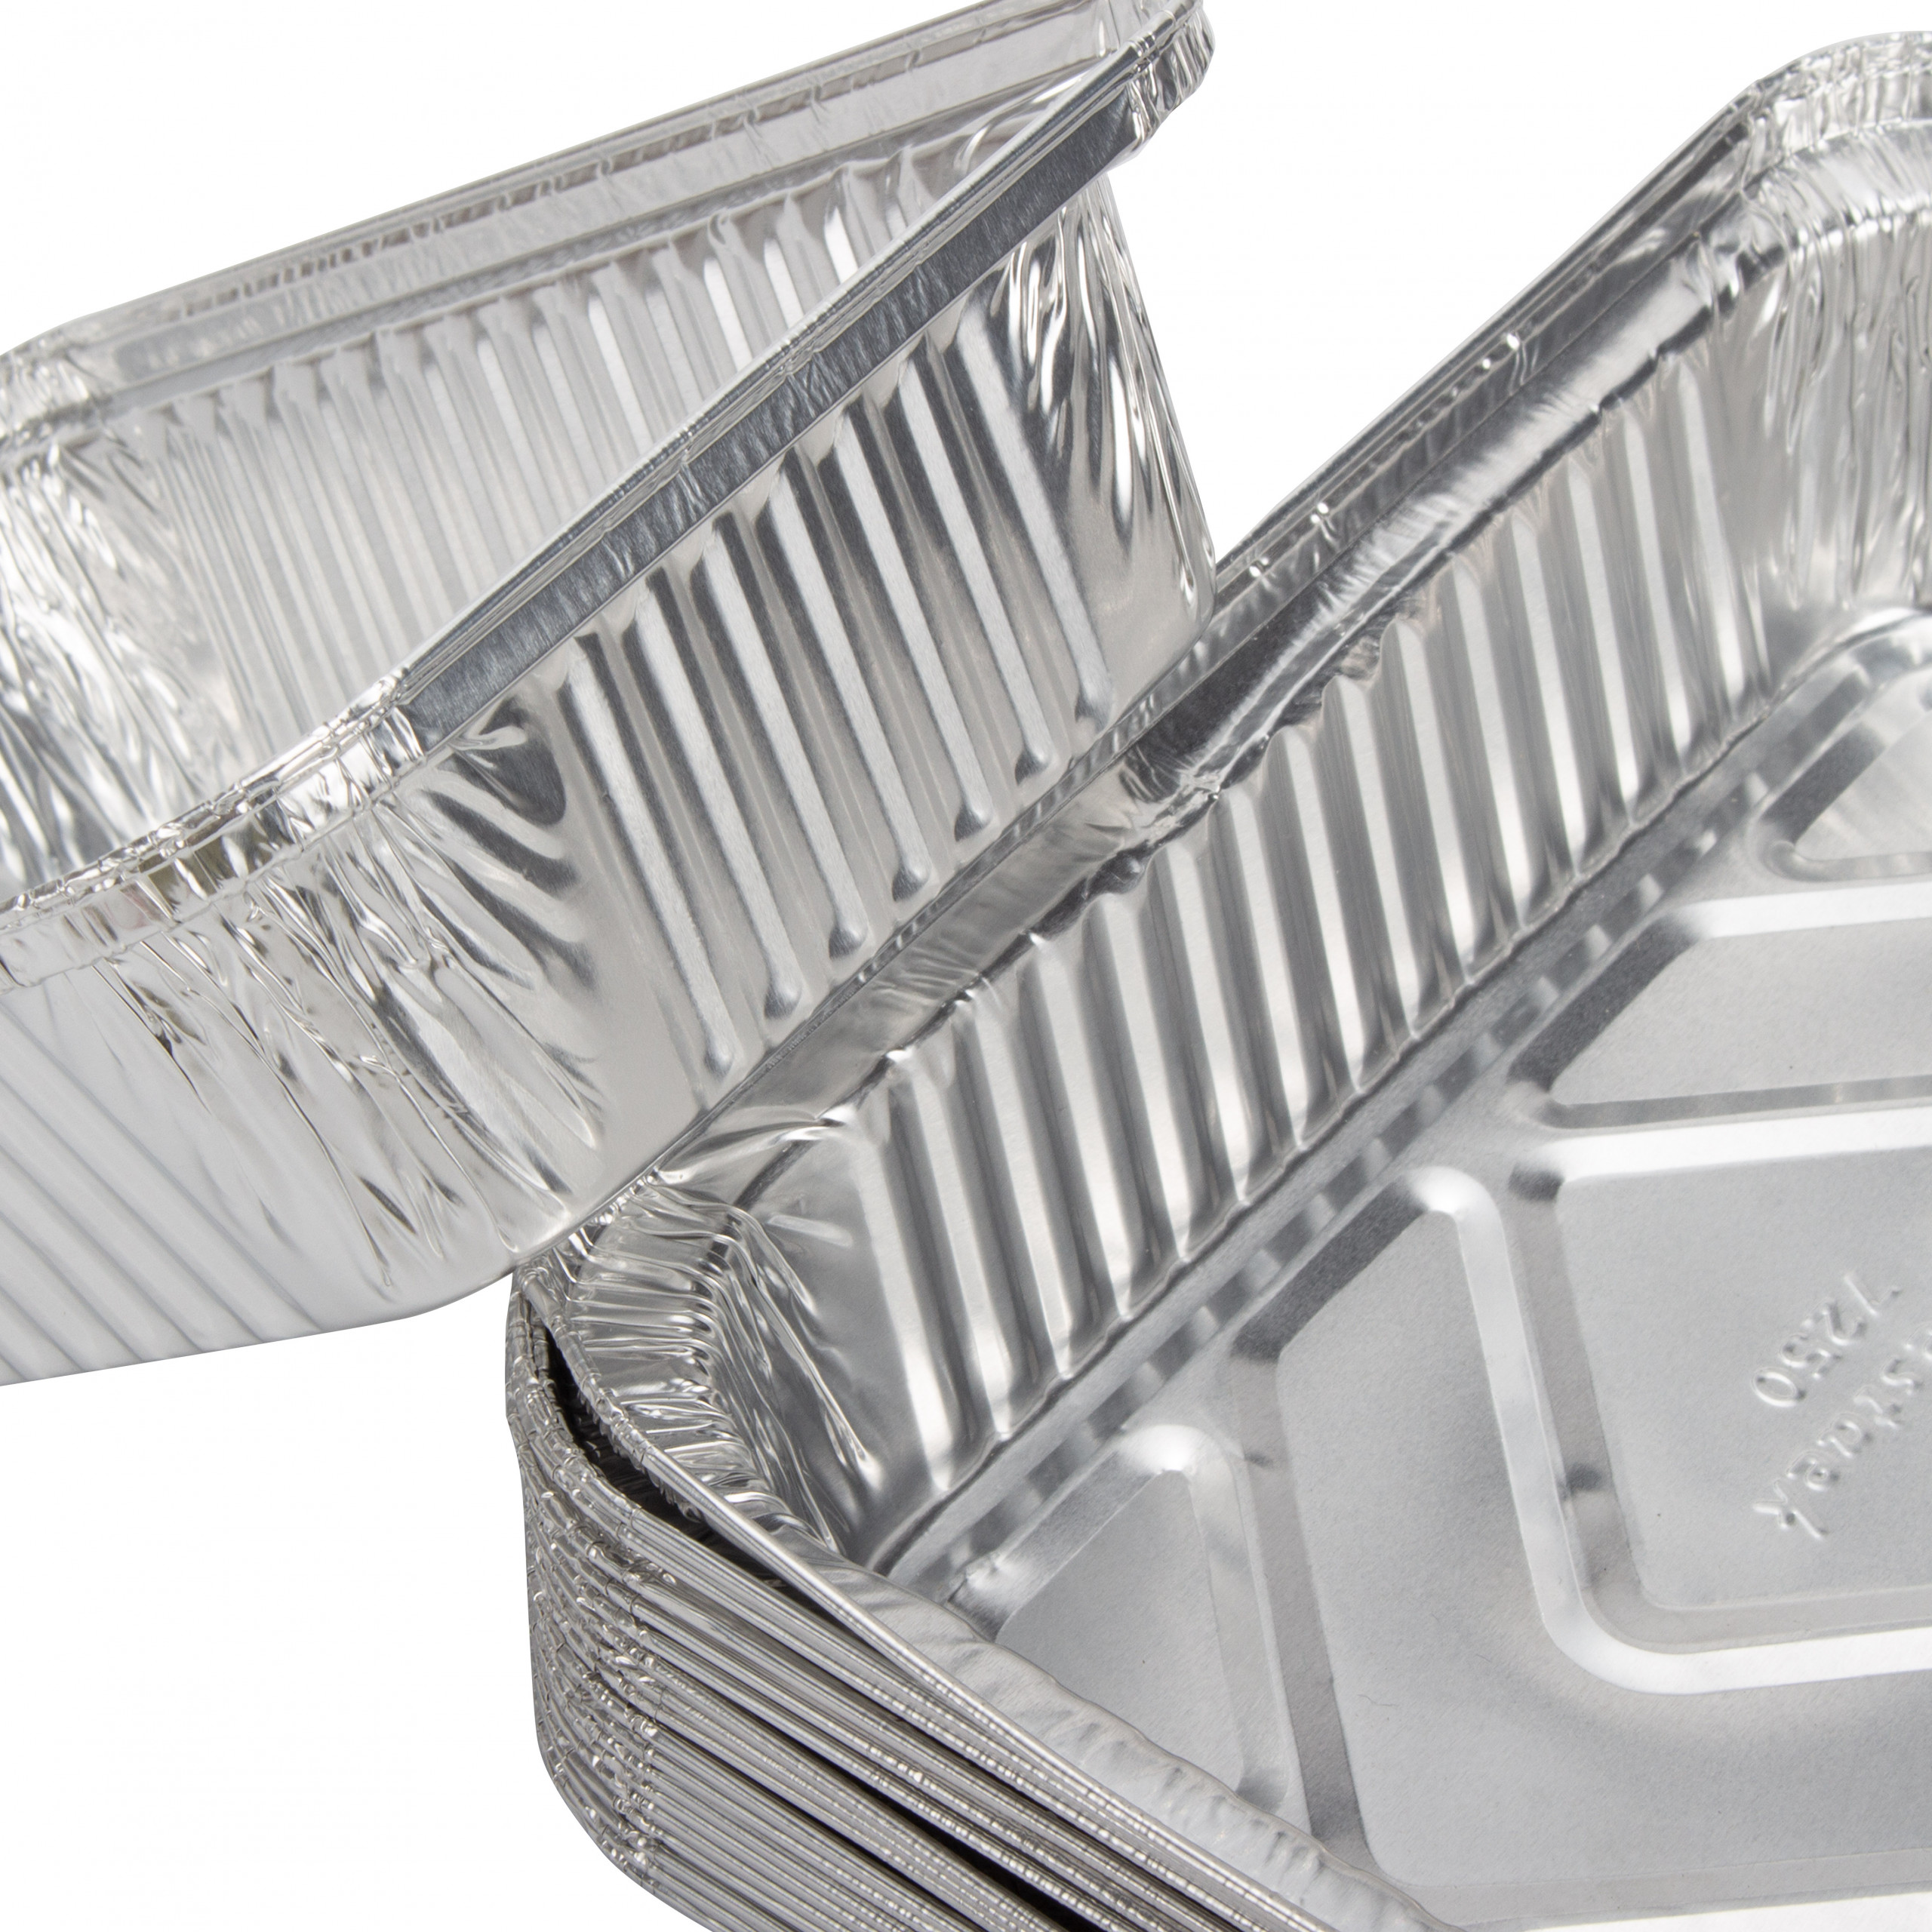 What Are The Benefits of Using Aluminum Silver Foil Containers? - CANLID  INDUSTRIES